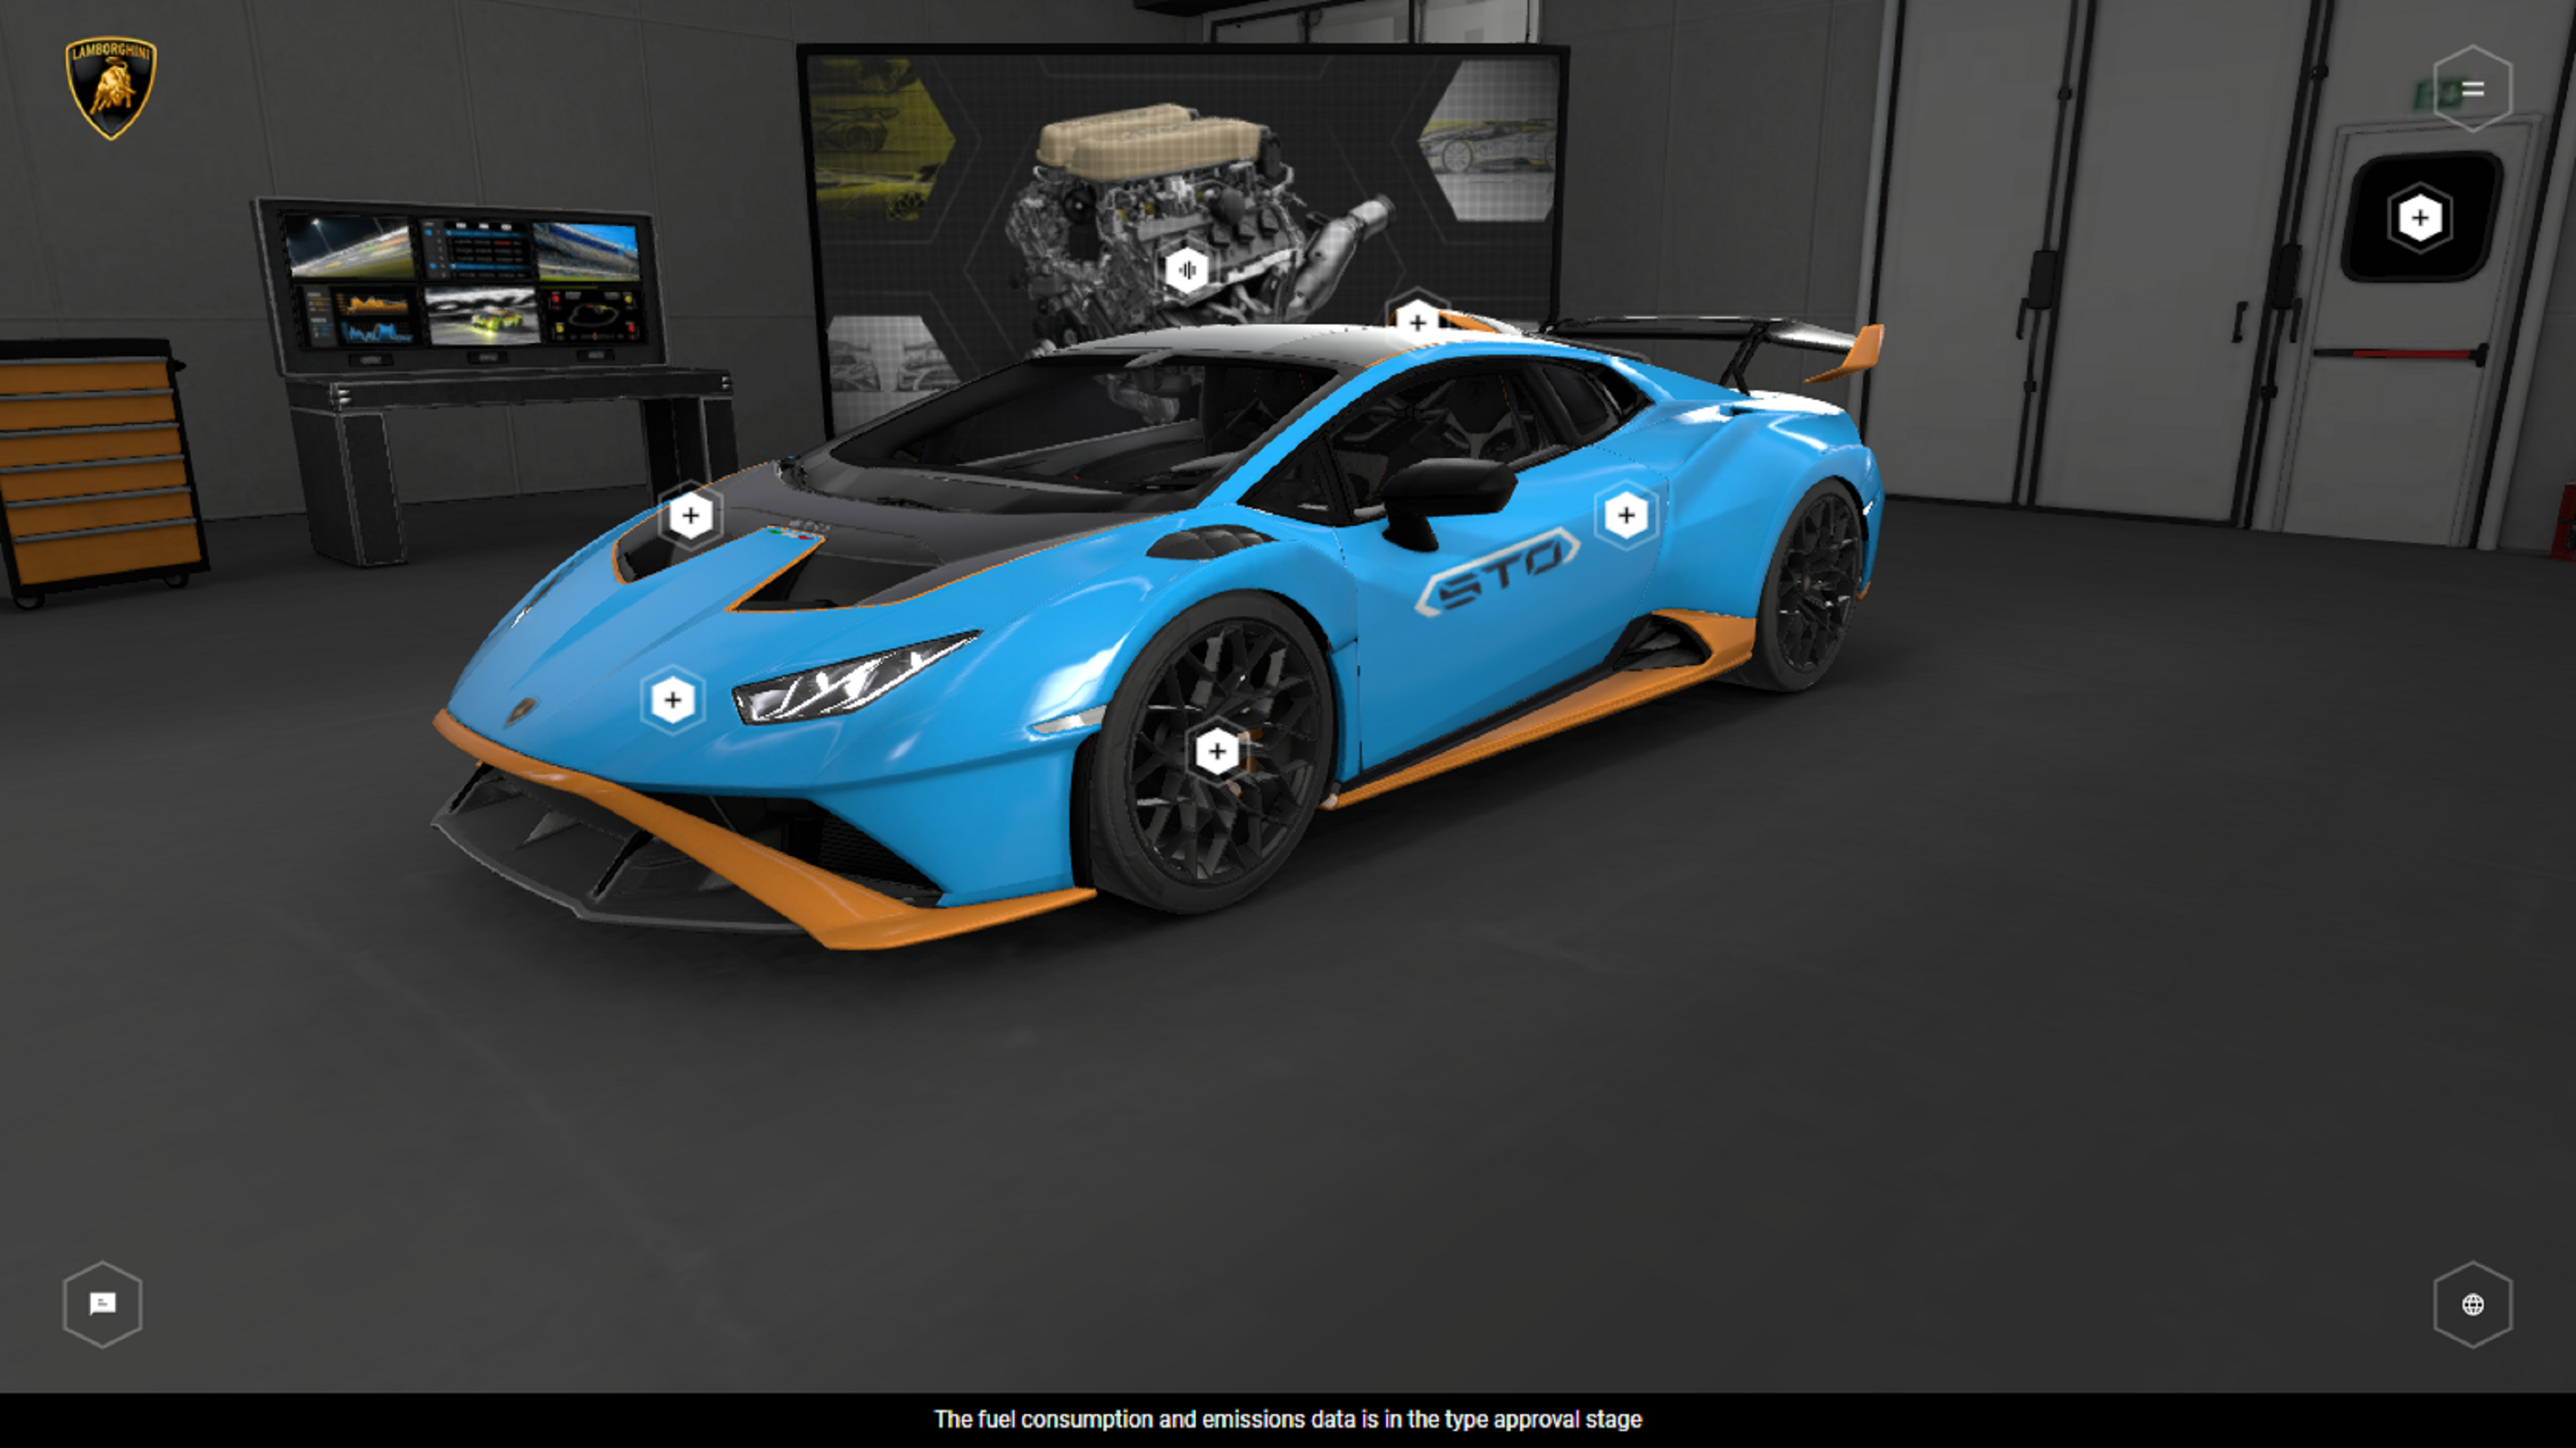 Watch Lamborghini's effort in Daytona and understand the car in detail here